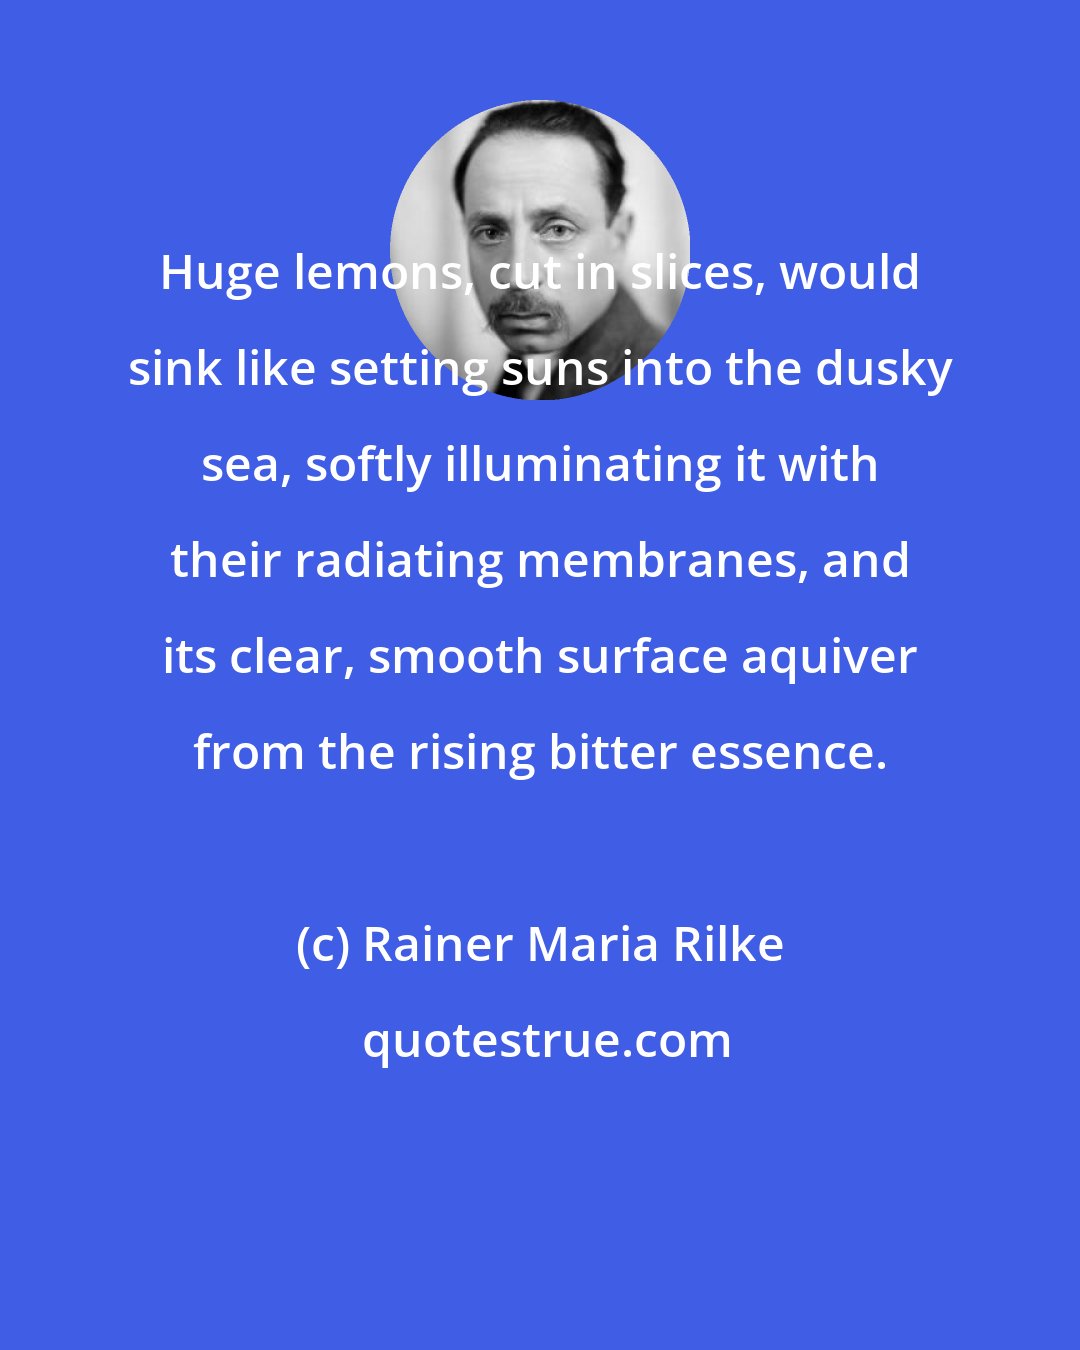 Rainer Maria Rilke: Huge lemons, cut in slices, would sink like setting suns into the dusky sea, softly illuminating it with their radiating membranes, and its clear, smooth surface aquiver from the rising bitter essence.